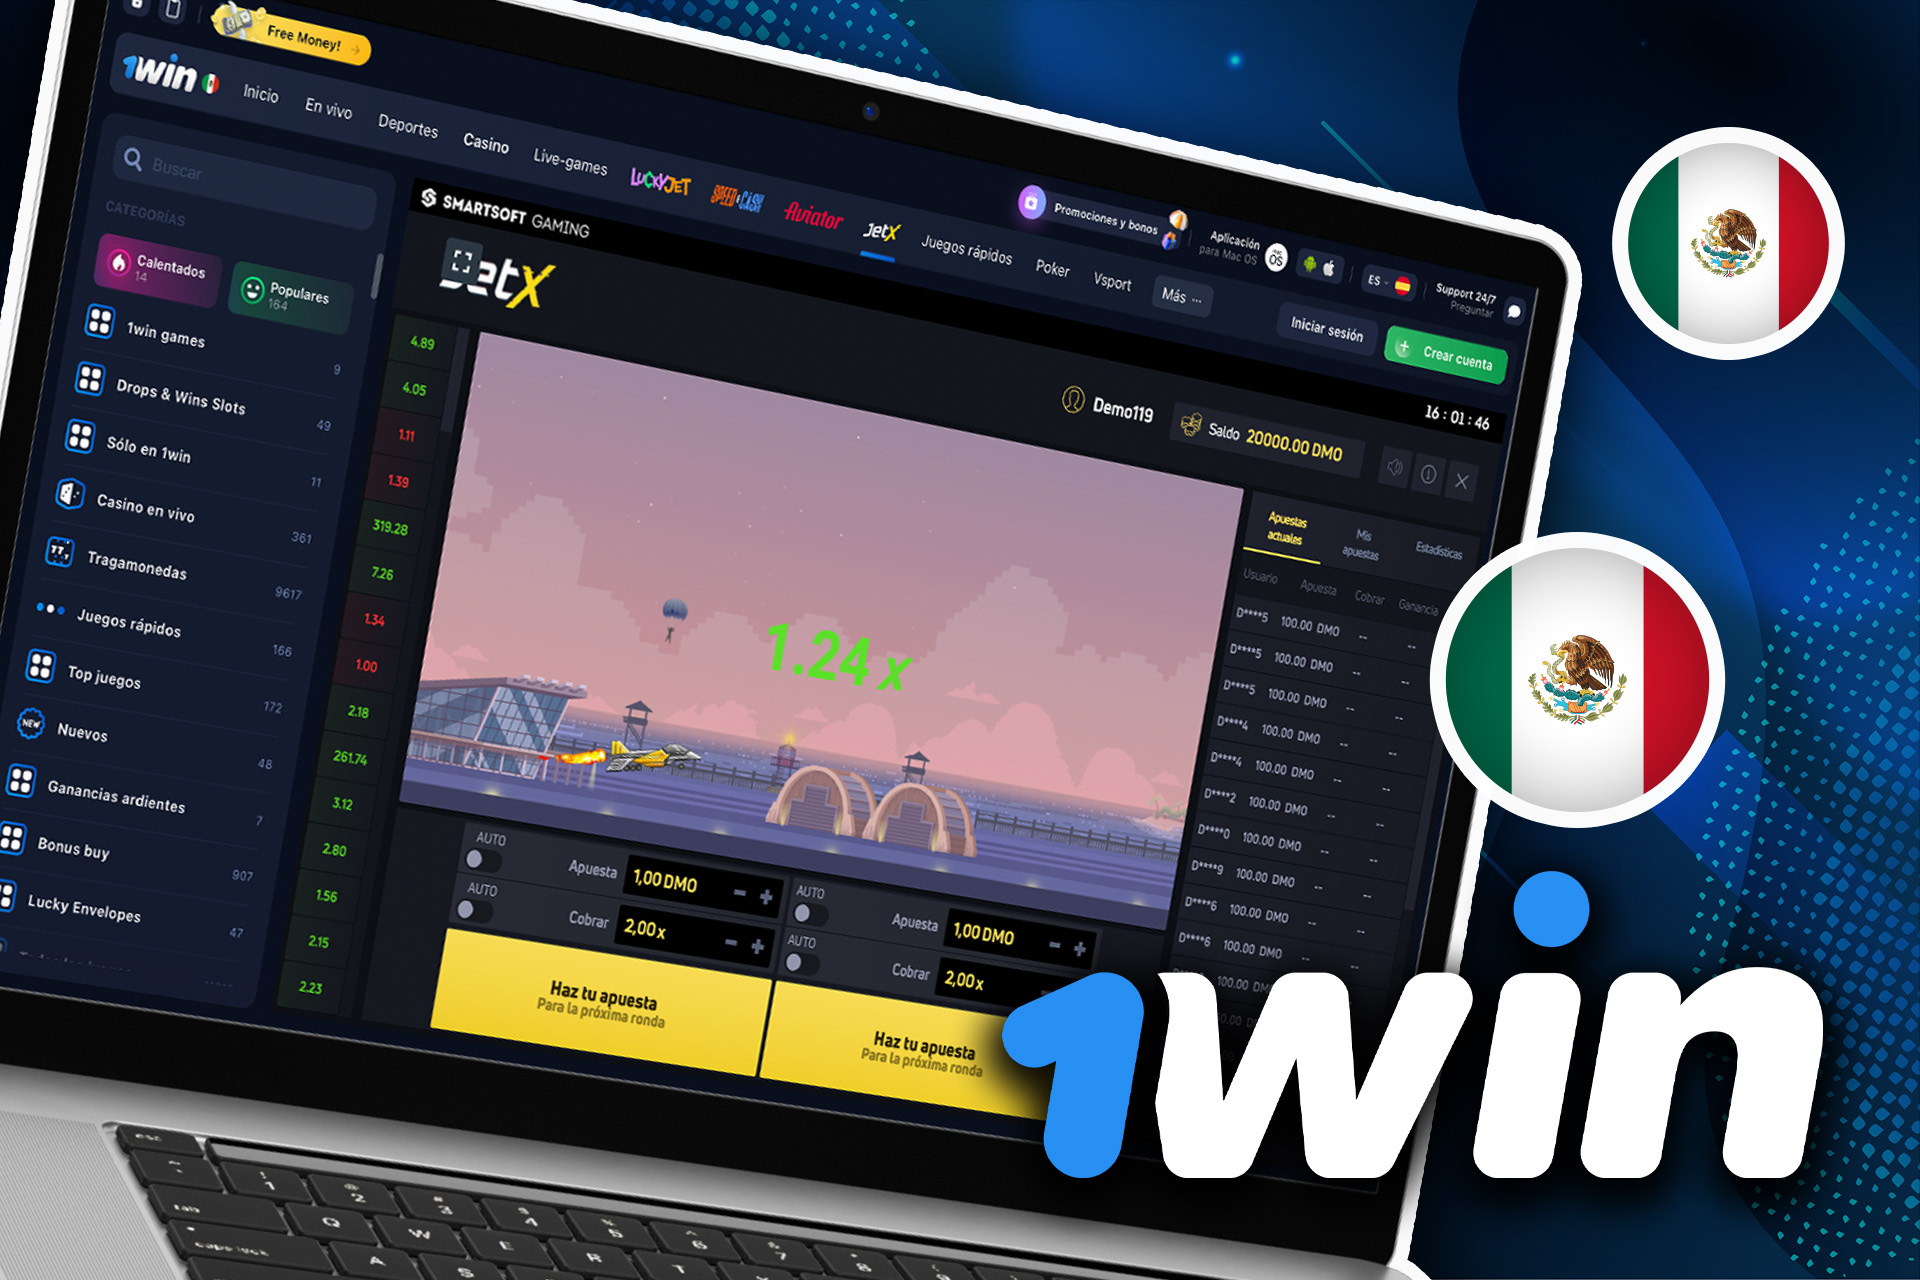 Go to the 1win casino section, find the Jet X game and start playing.